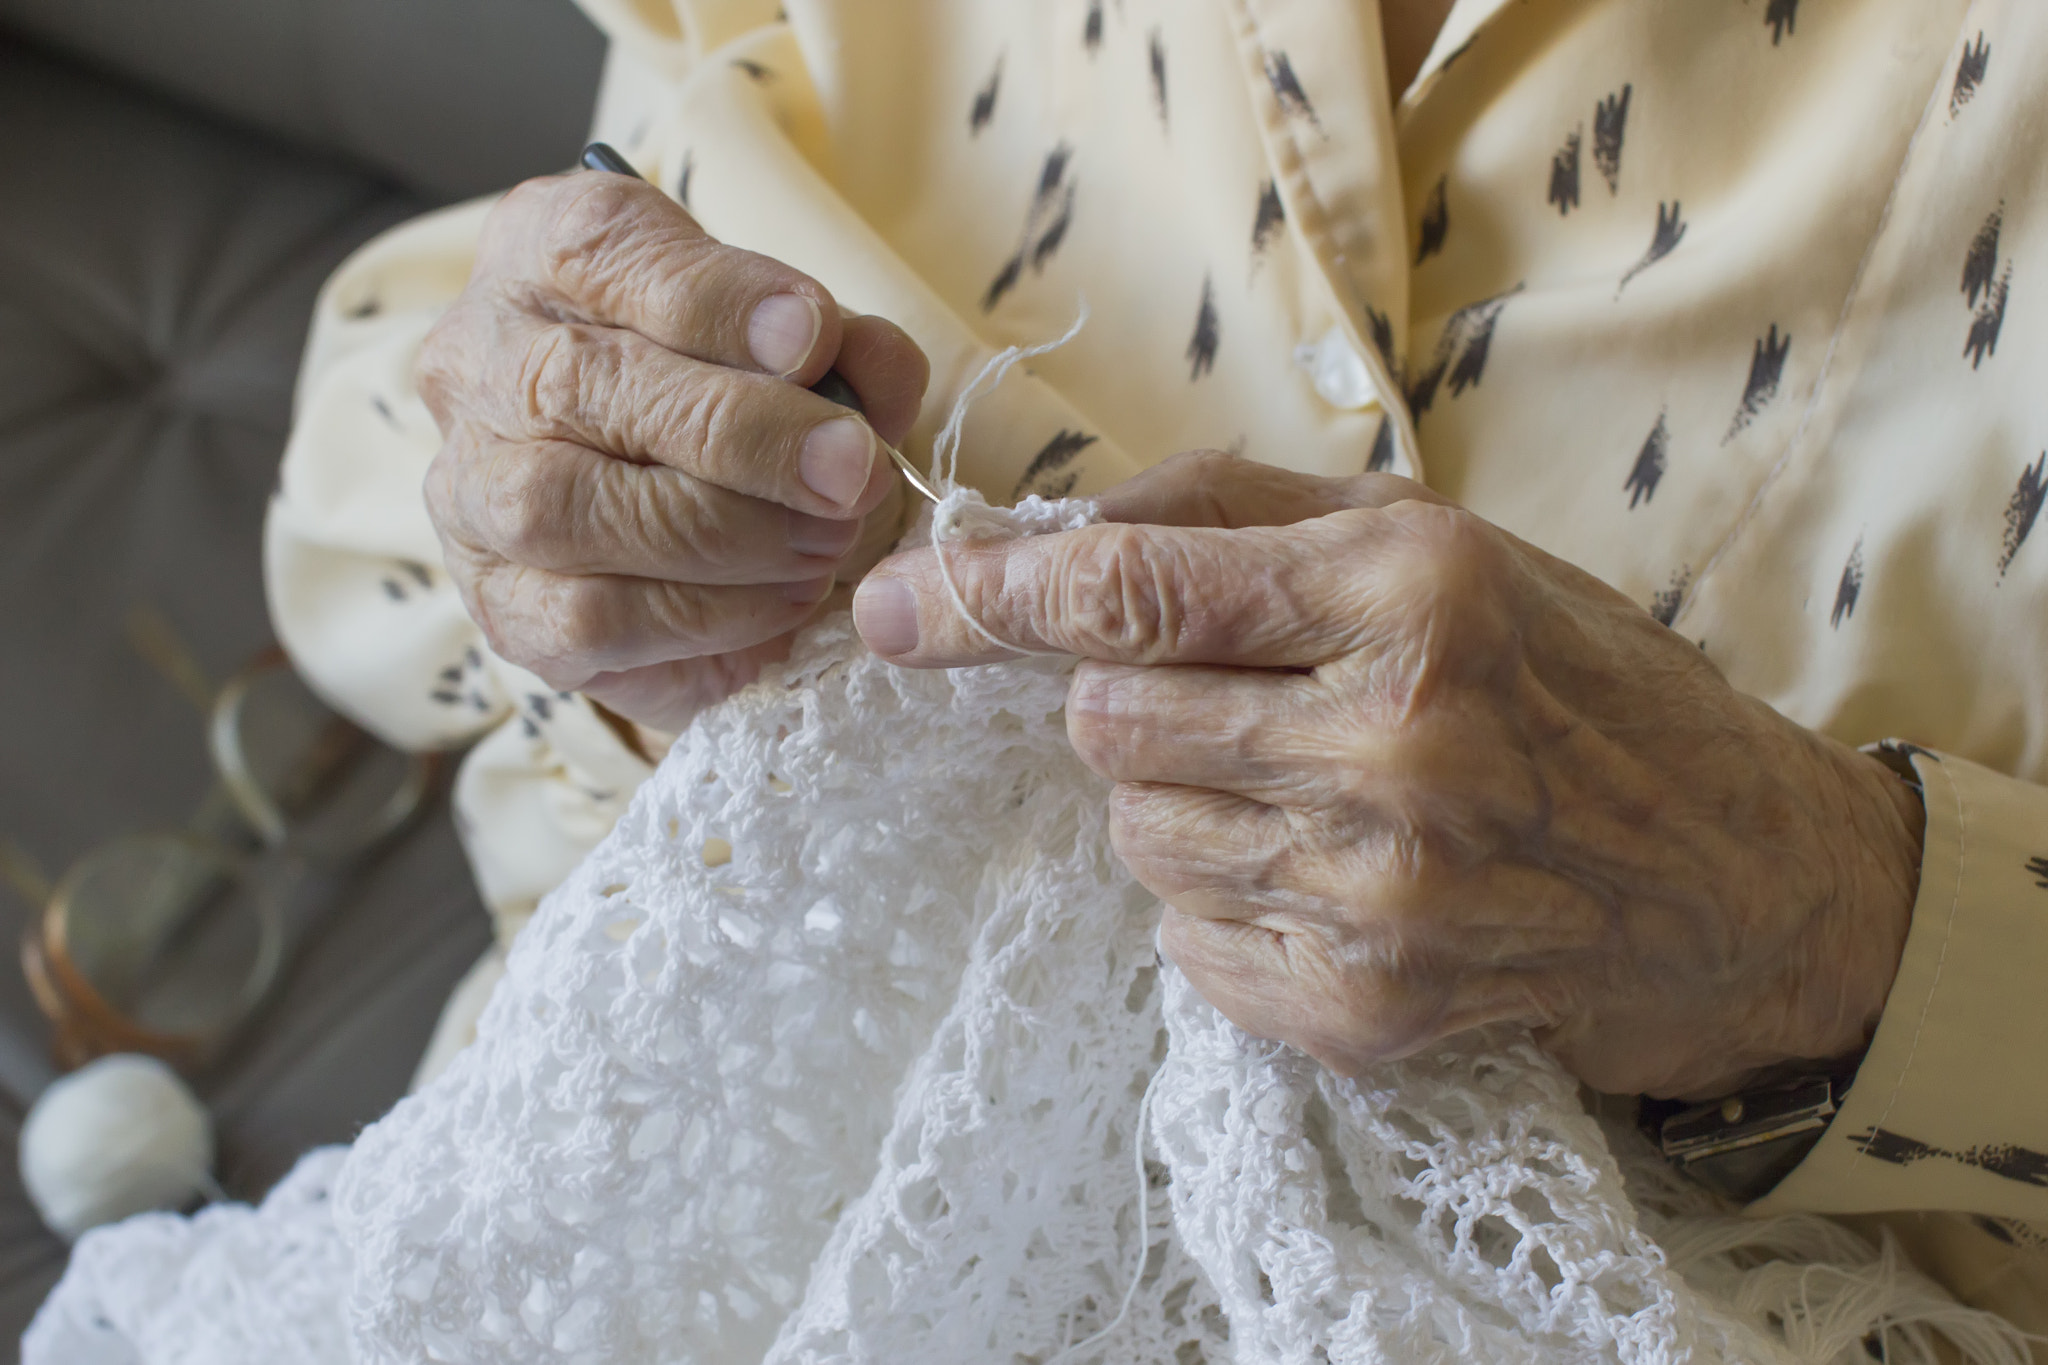 Detail of the hands crocheting